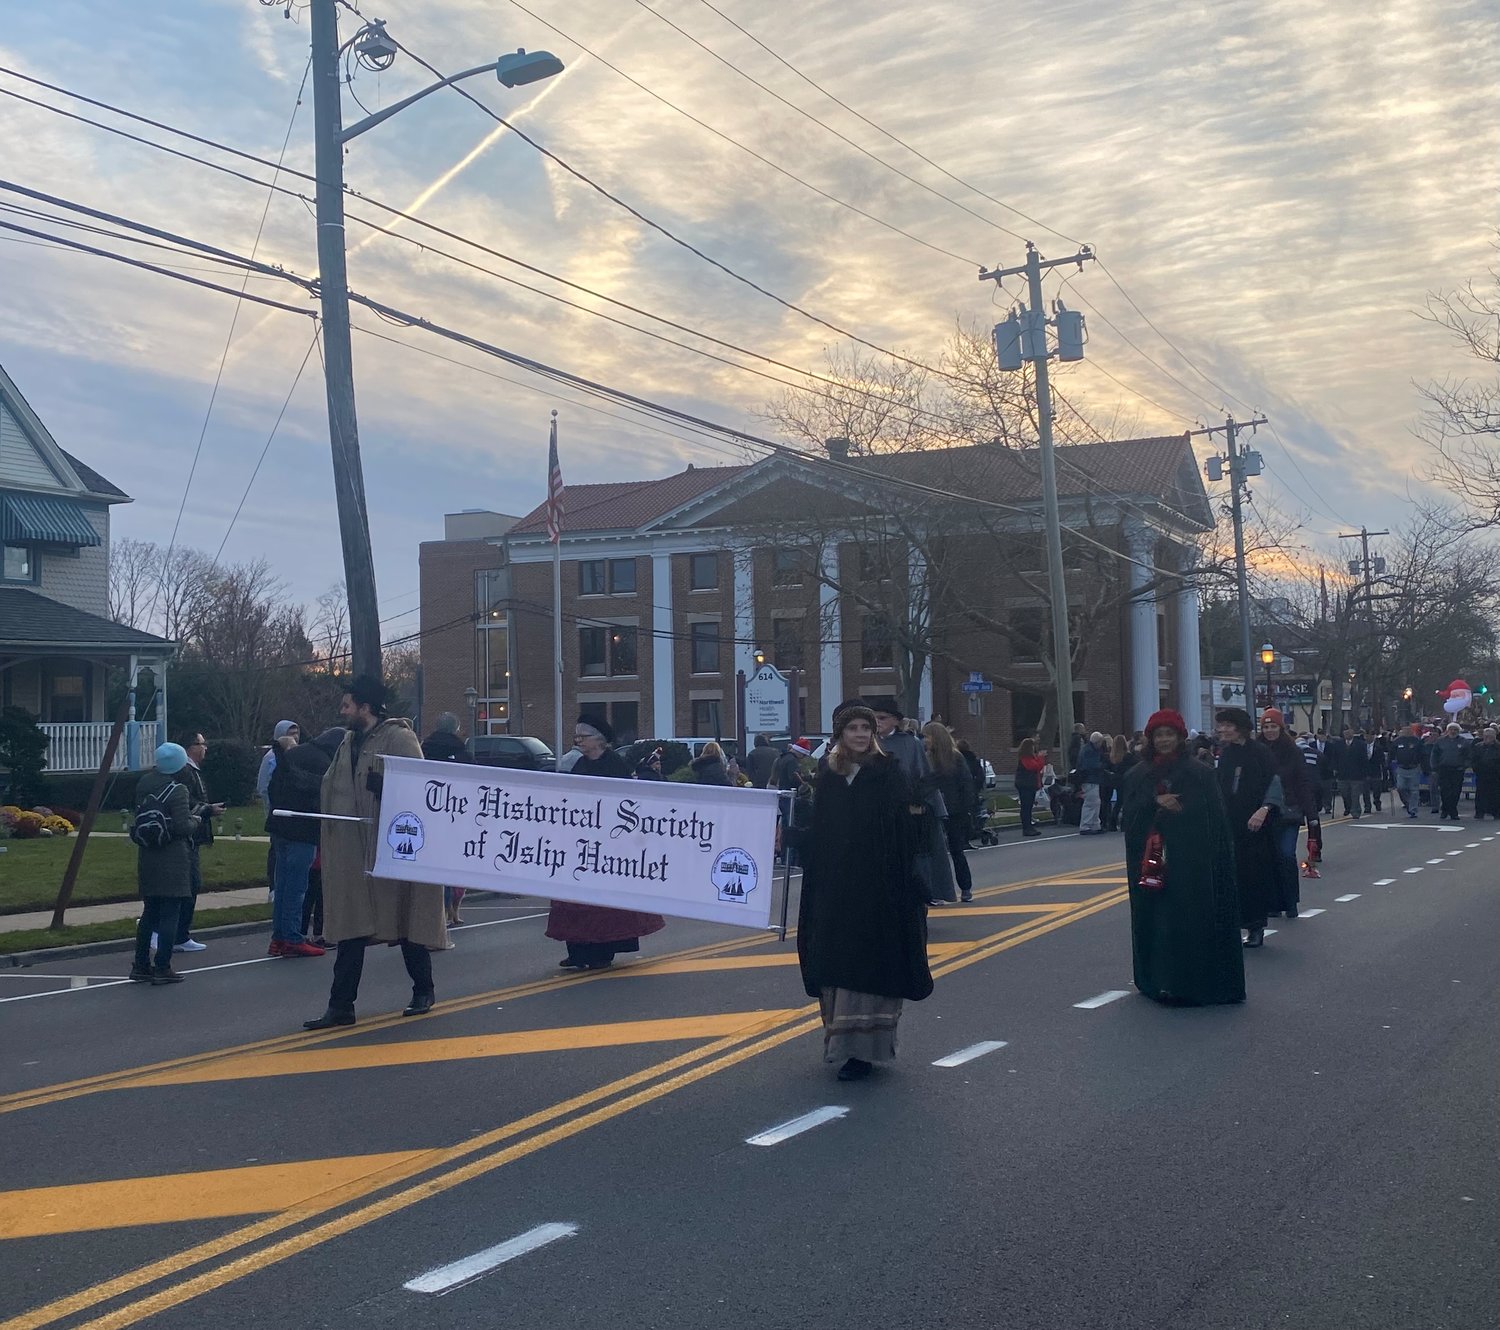 Members of The Historical Society of Islip Hamlet march in the parade.